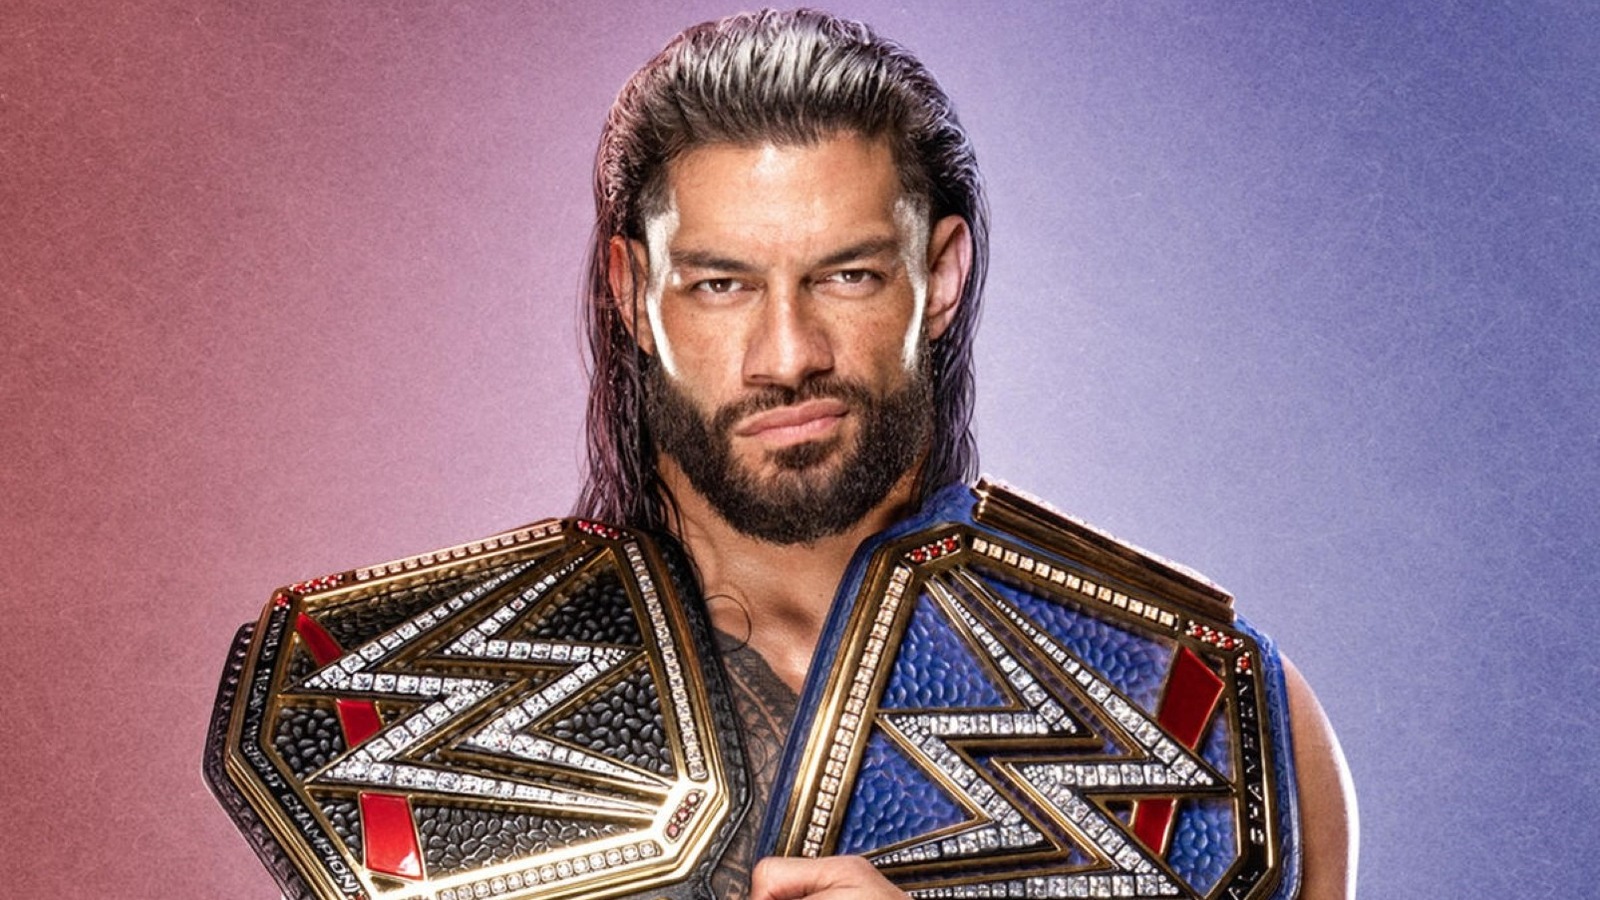 Roman Reigns Net Worth And Source Of